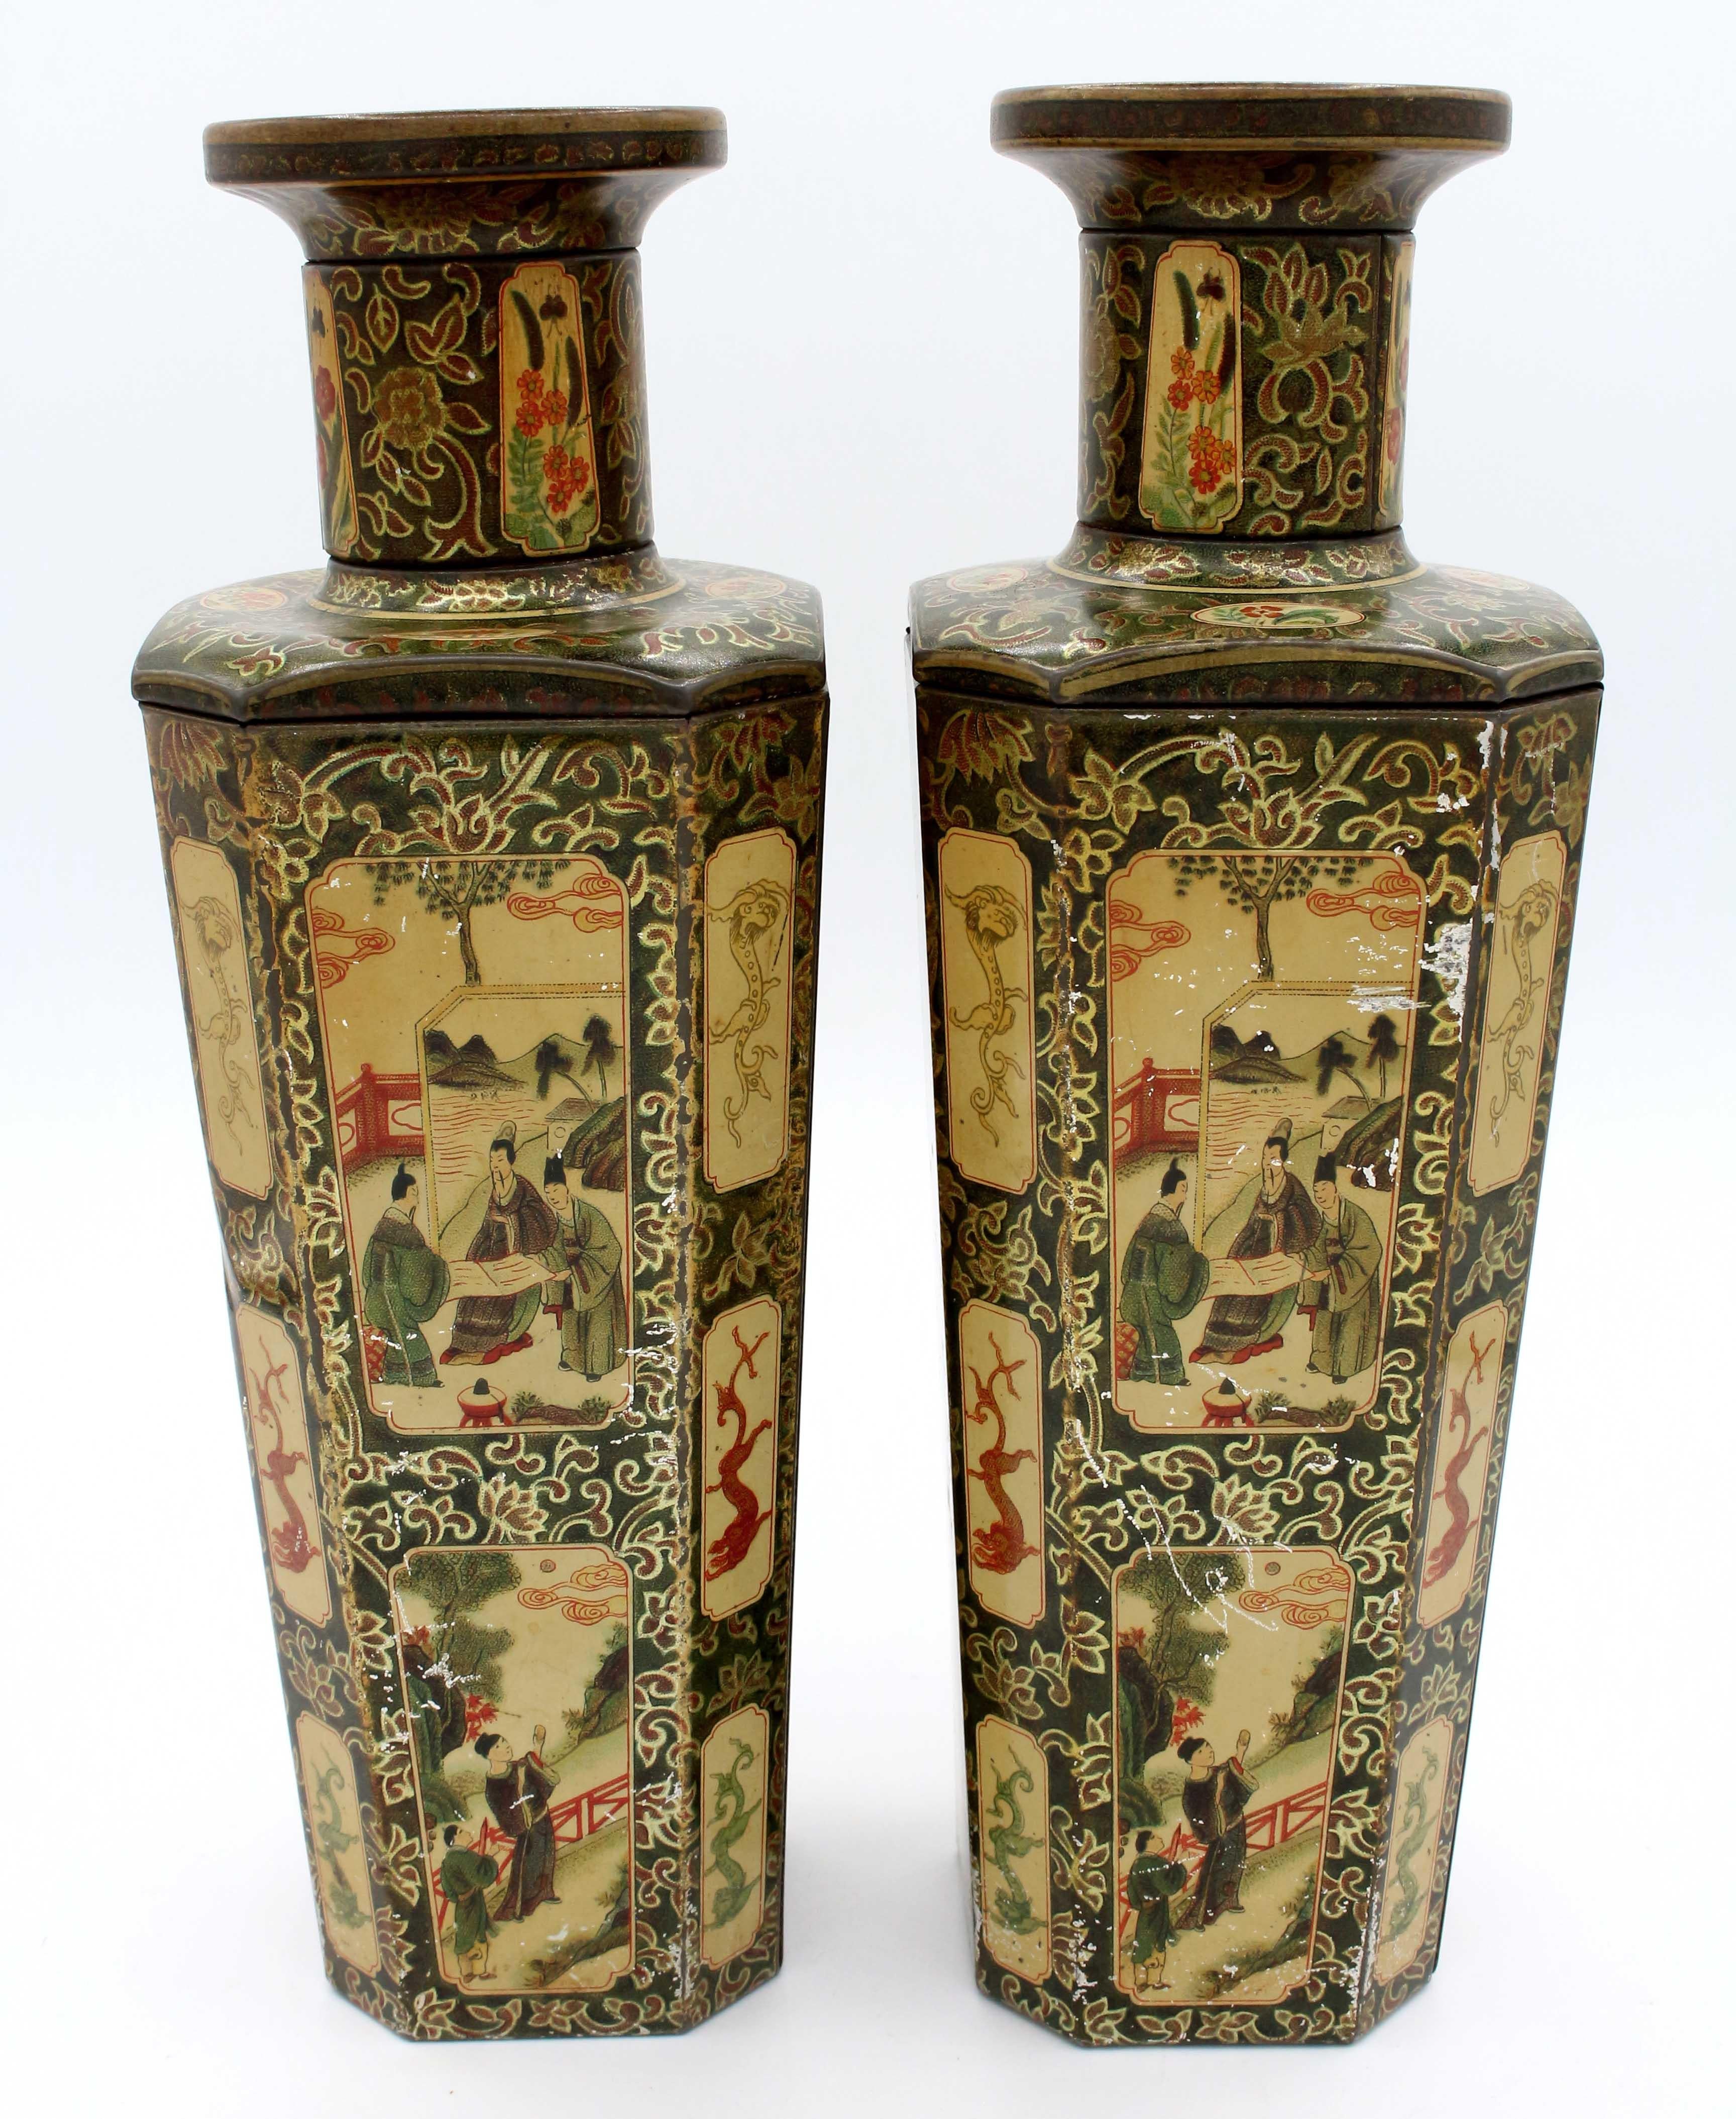 Pair of vase form biscuit tin boxes by Huntley & Palmers, 1928, English. Faux Worcester vases after the 18th century chinoiserie designs for garniture vases. Overall good condition given age & use, minor dents & nicks. This famous tin was offered in